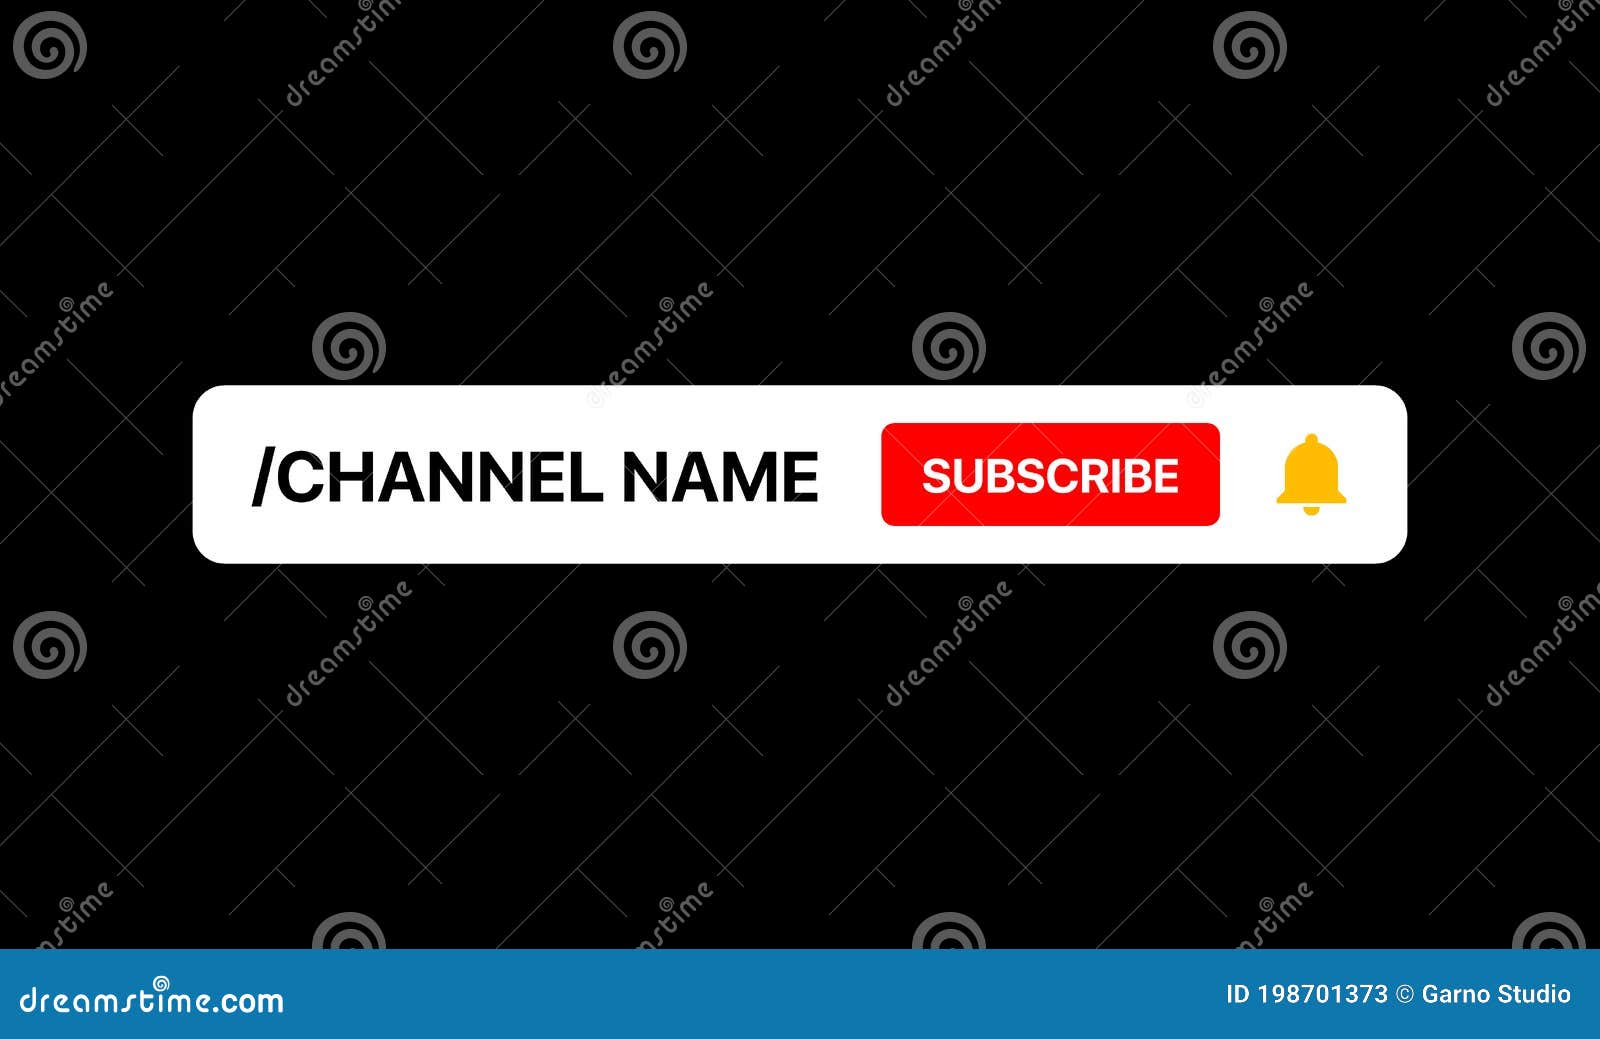 youtube channel name lower third. subscribe button. social media banner for your video on black background. 